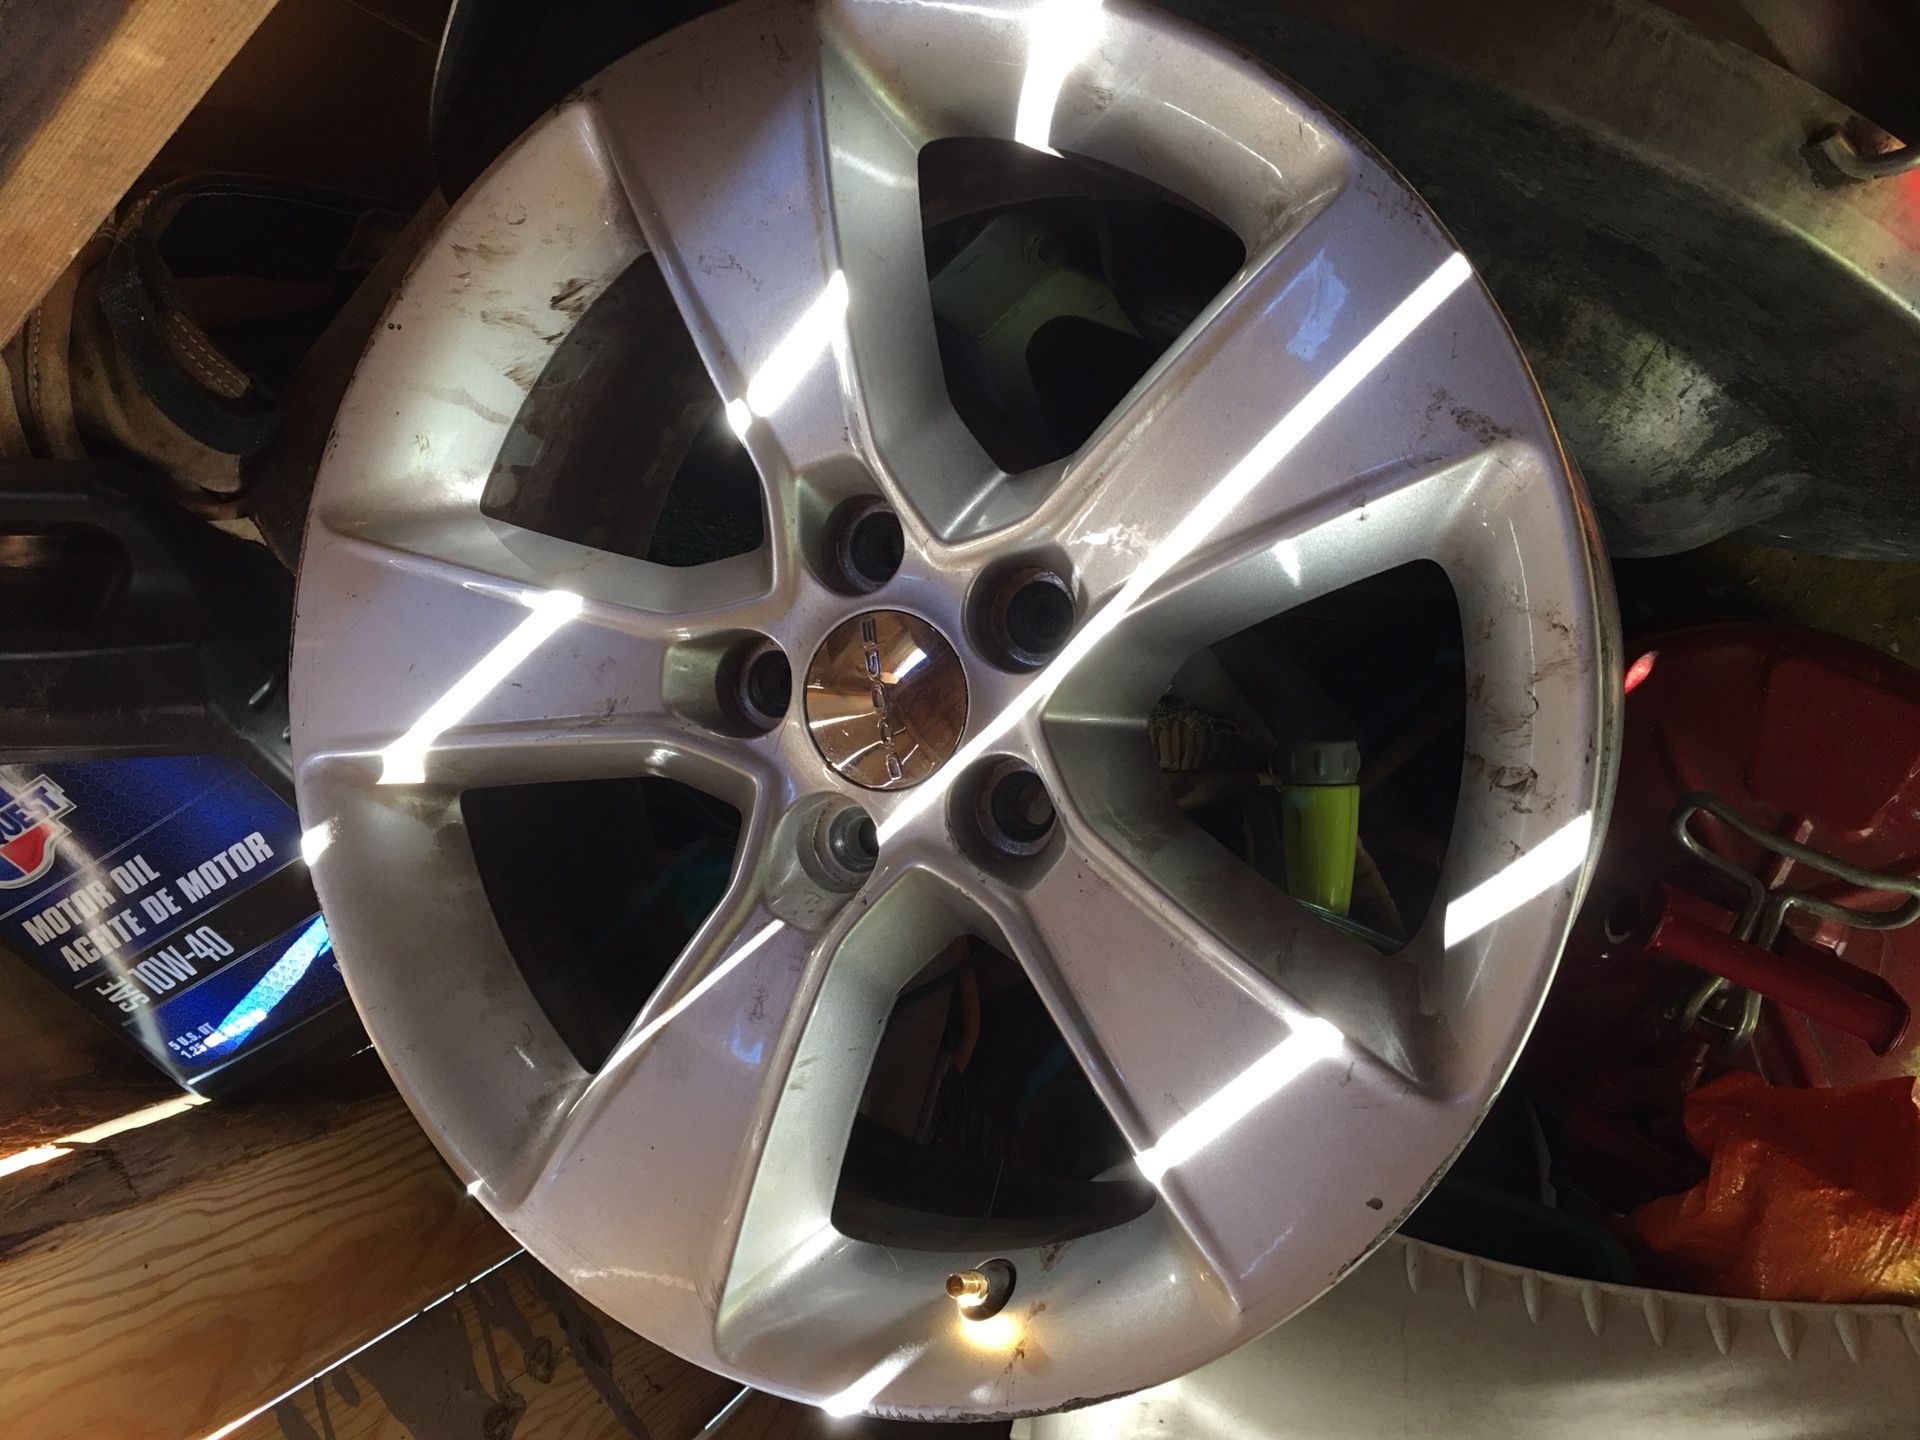 2011 Dodge charger stock rims 17”